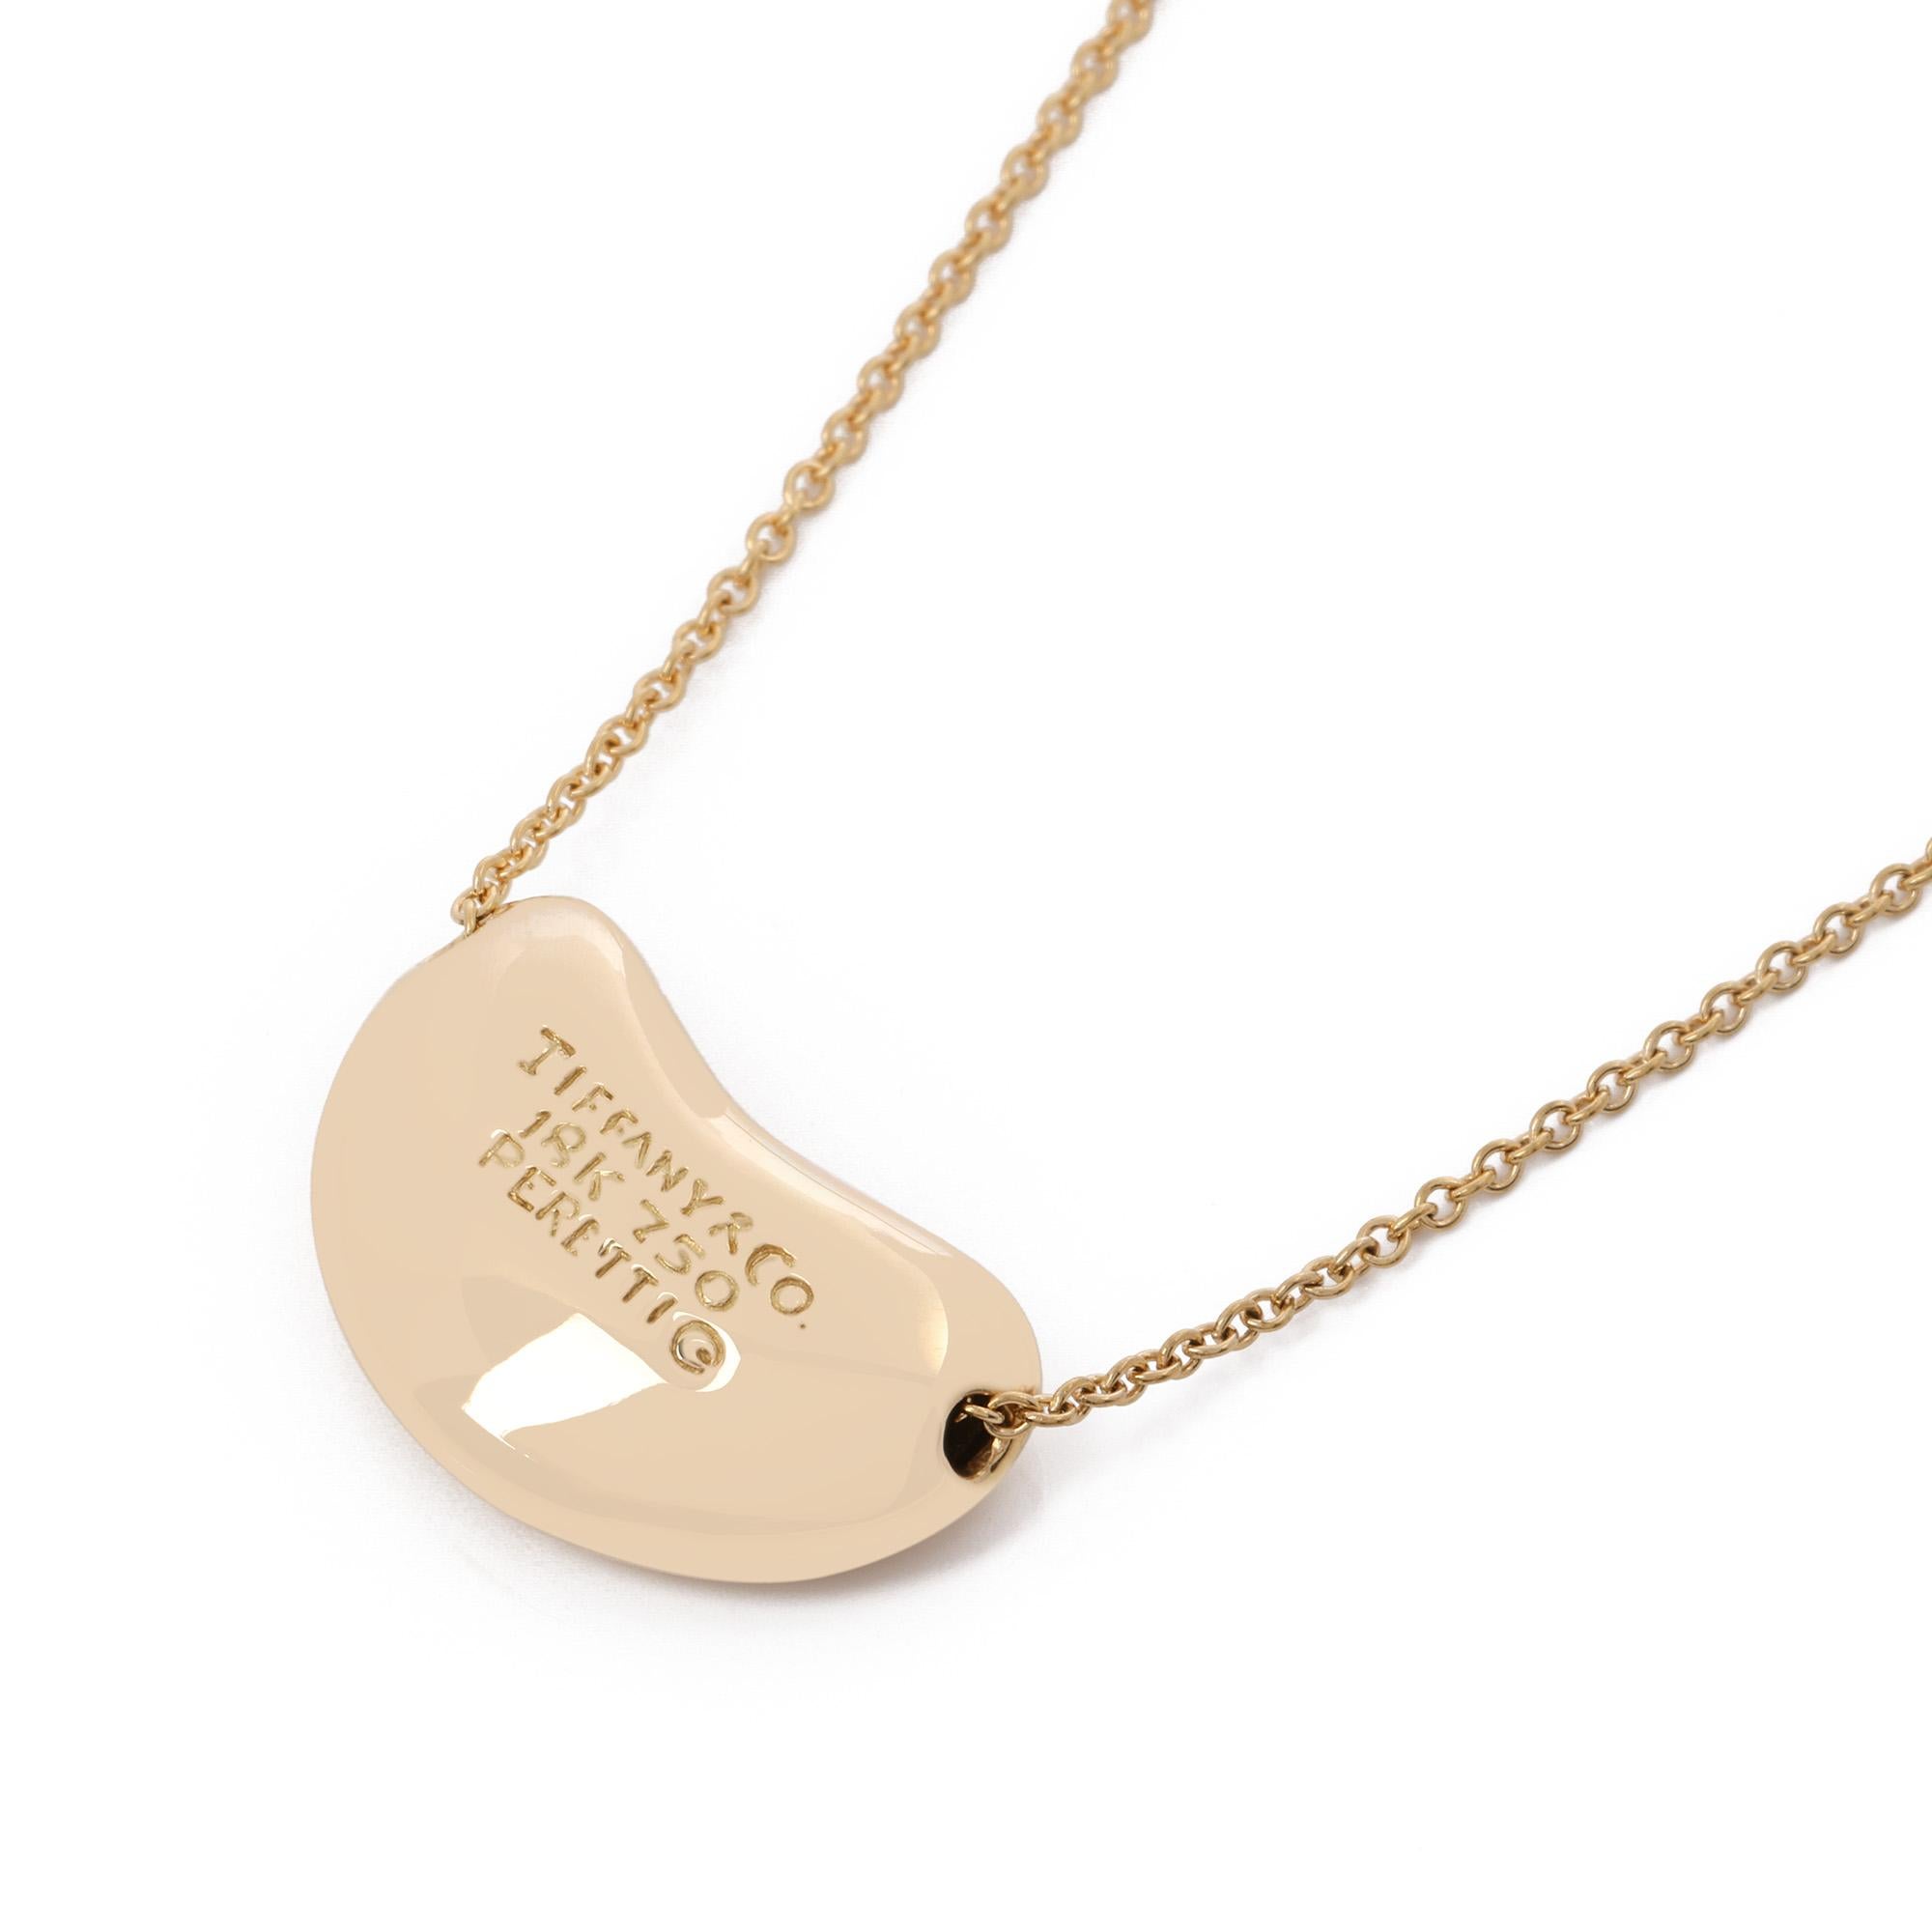 This pendant by Tiffany & Co is from their Elsa Peretti collection and features an 18mm 18ct gold bean set on a 41cm trace chain. Complete with box and pouch. Our Xupes reference is COMJ625 should you need to quote this. 